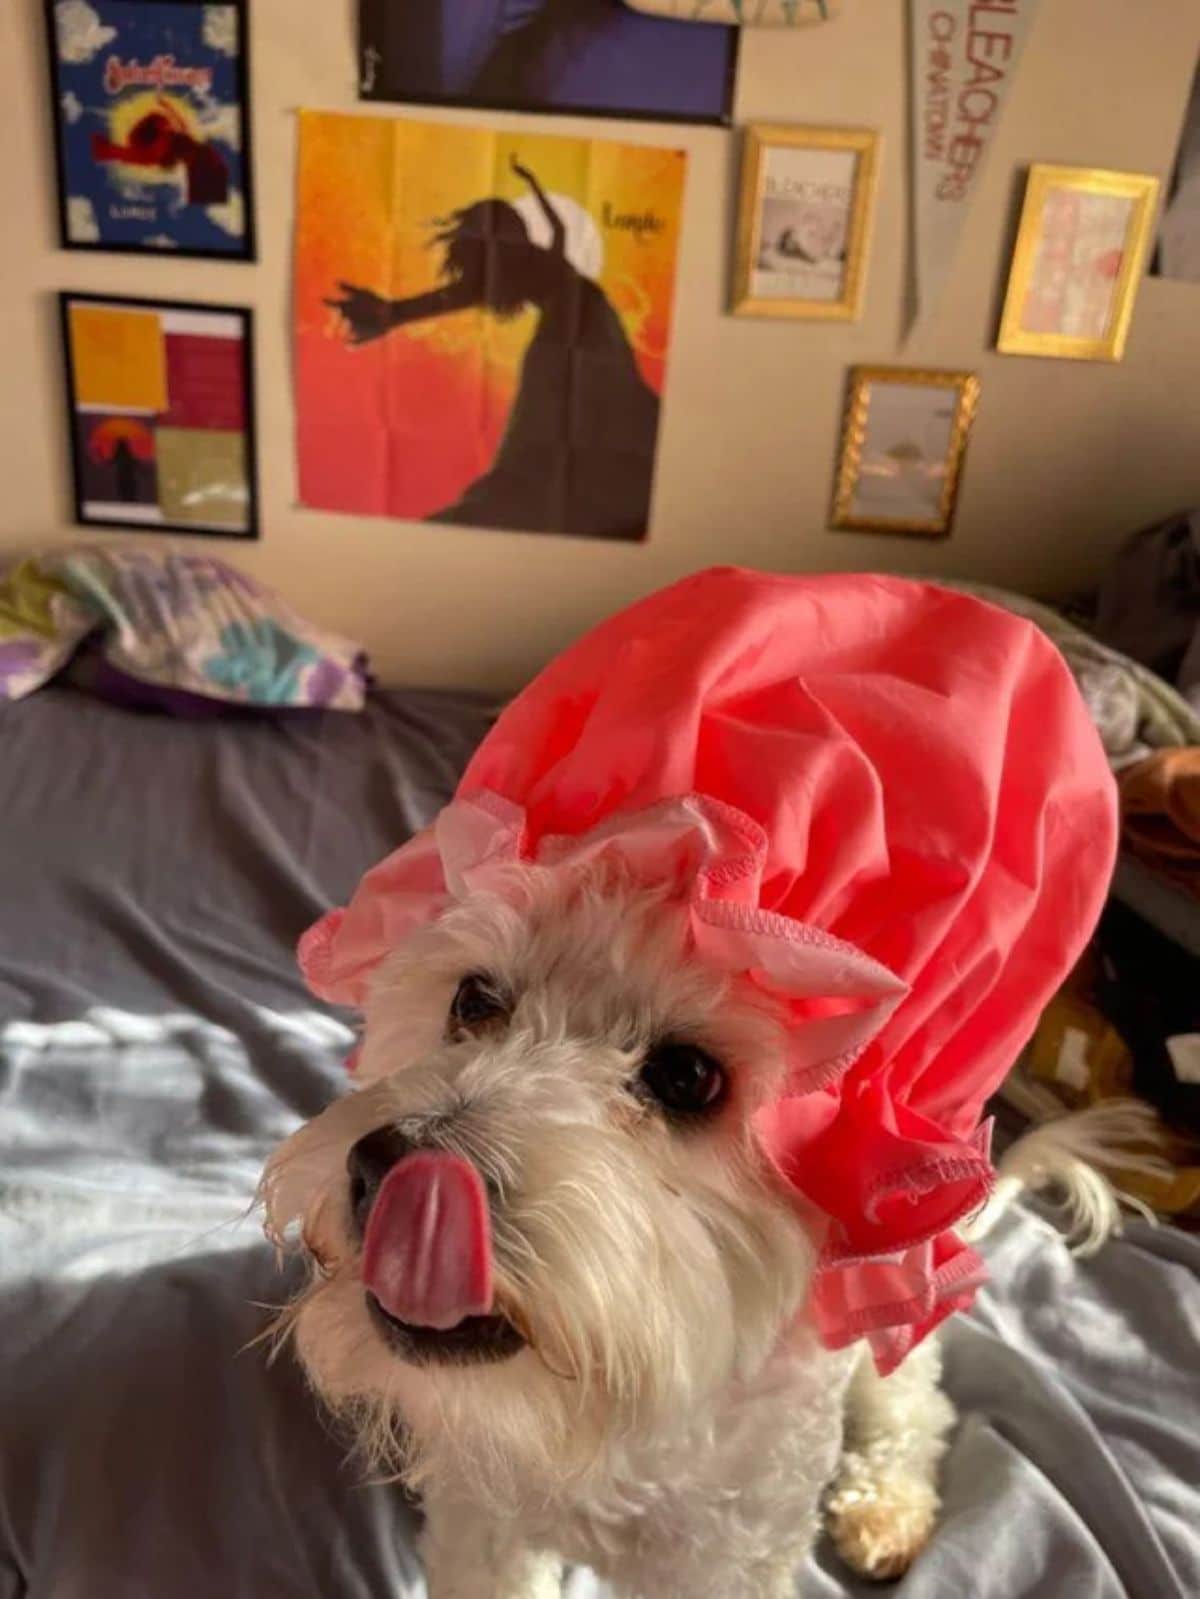 fluffy white dog with the tongue out to lick the nose and wearing a red shower cap